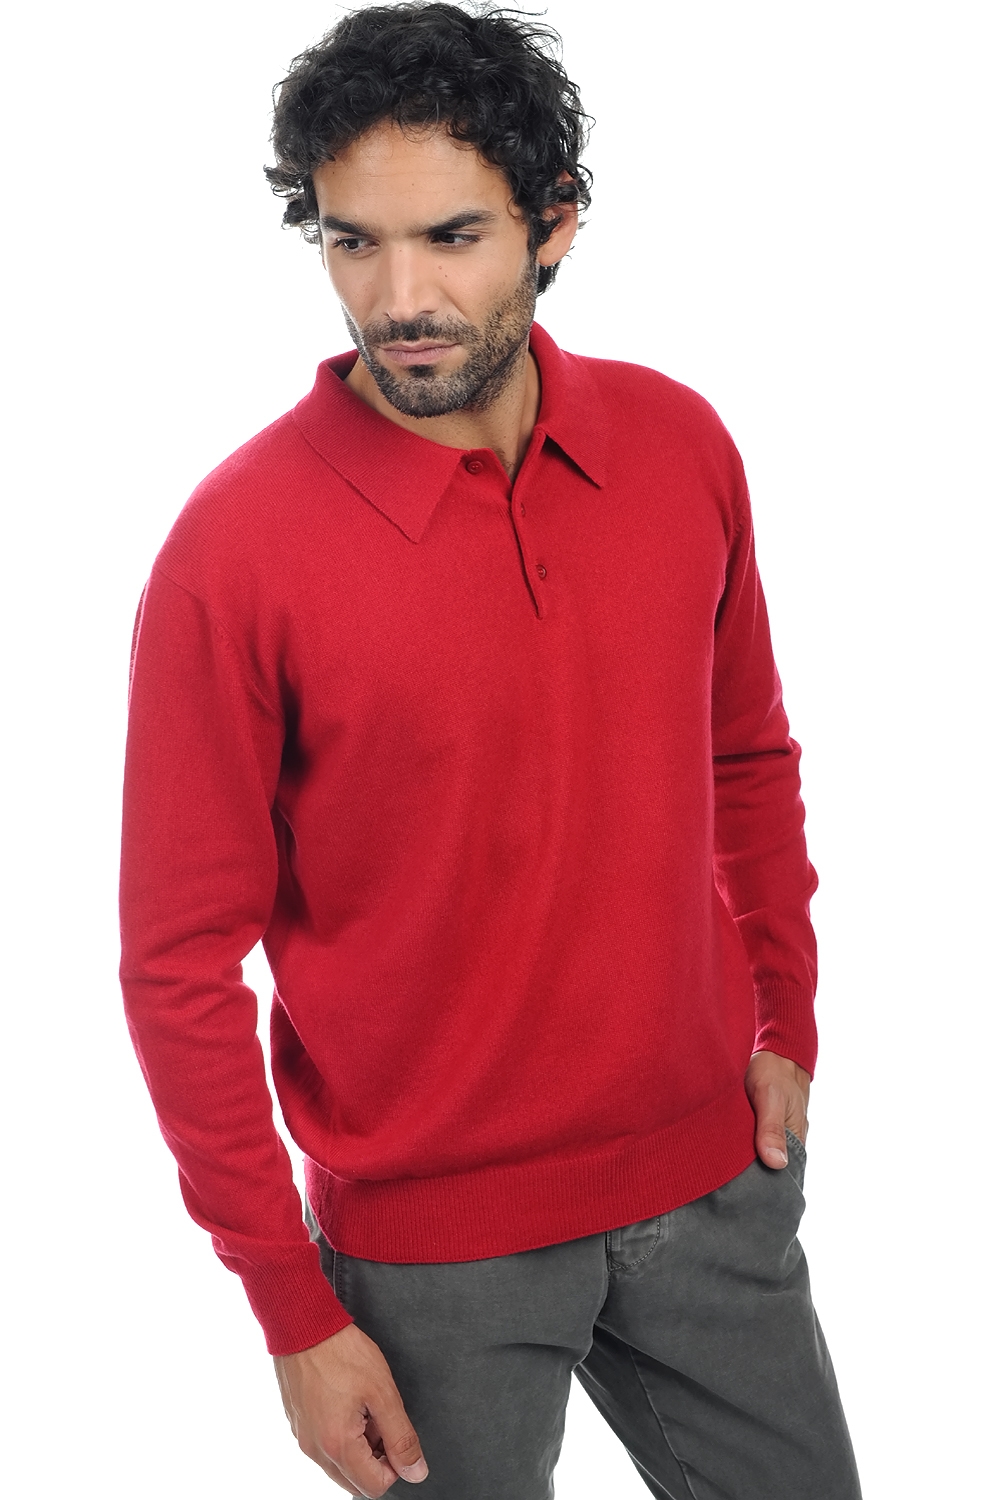 Cashmere men polo style sweaters alexandre blood red xl